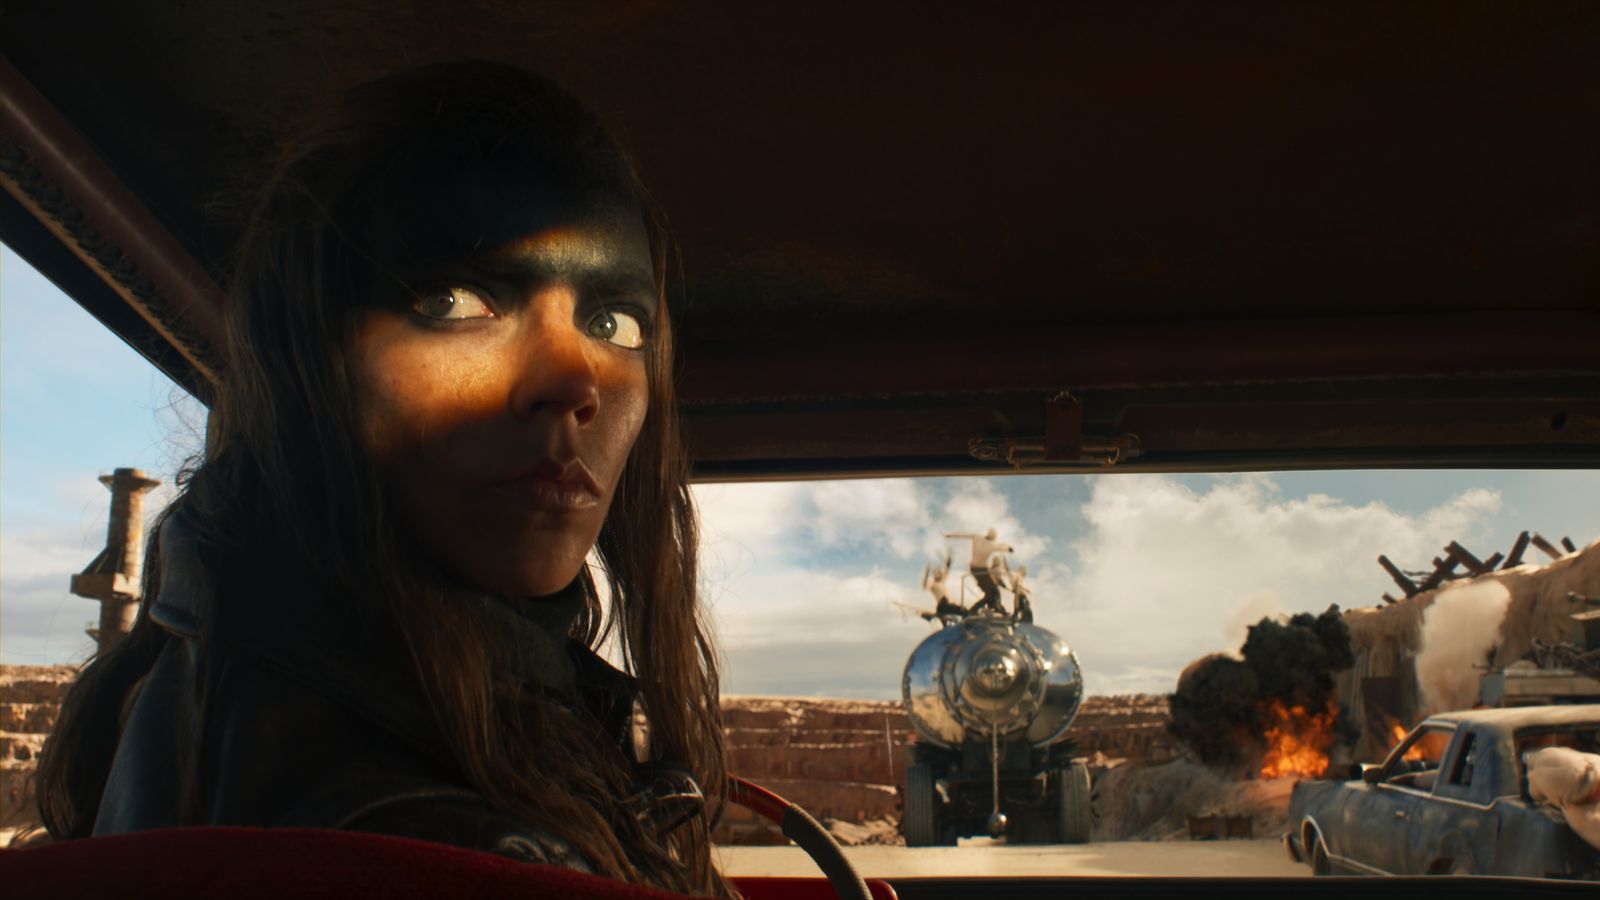 Mad Max: Director George Miller on tech limitations, the origin of the franchise and the future of film